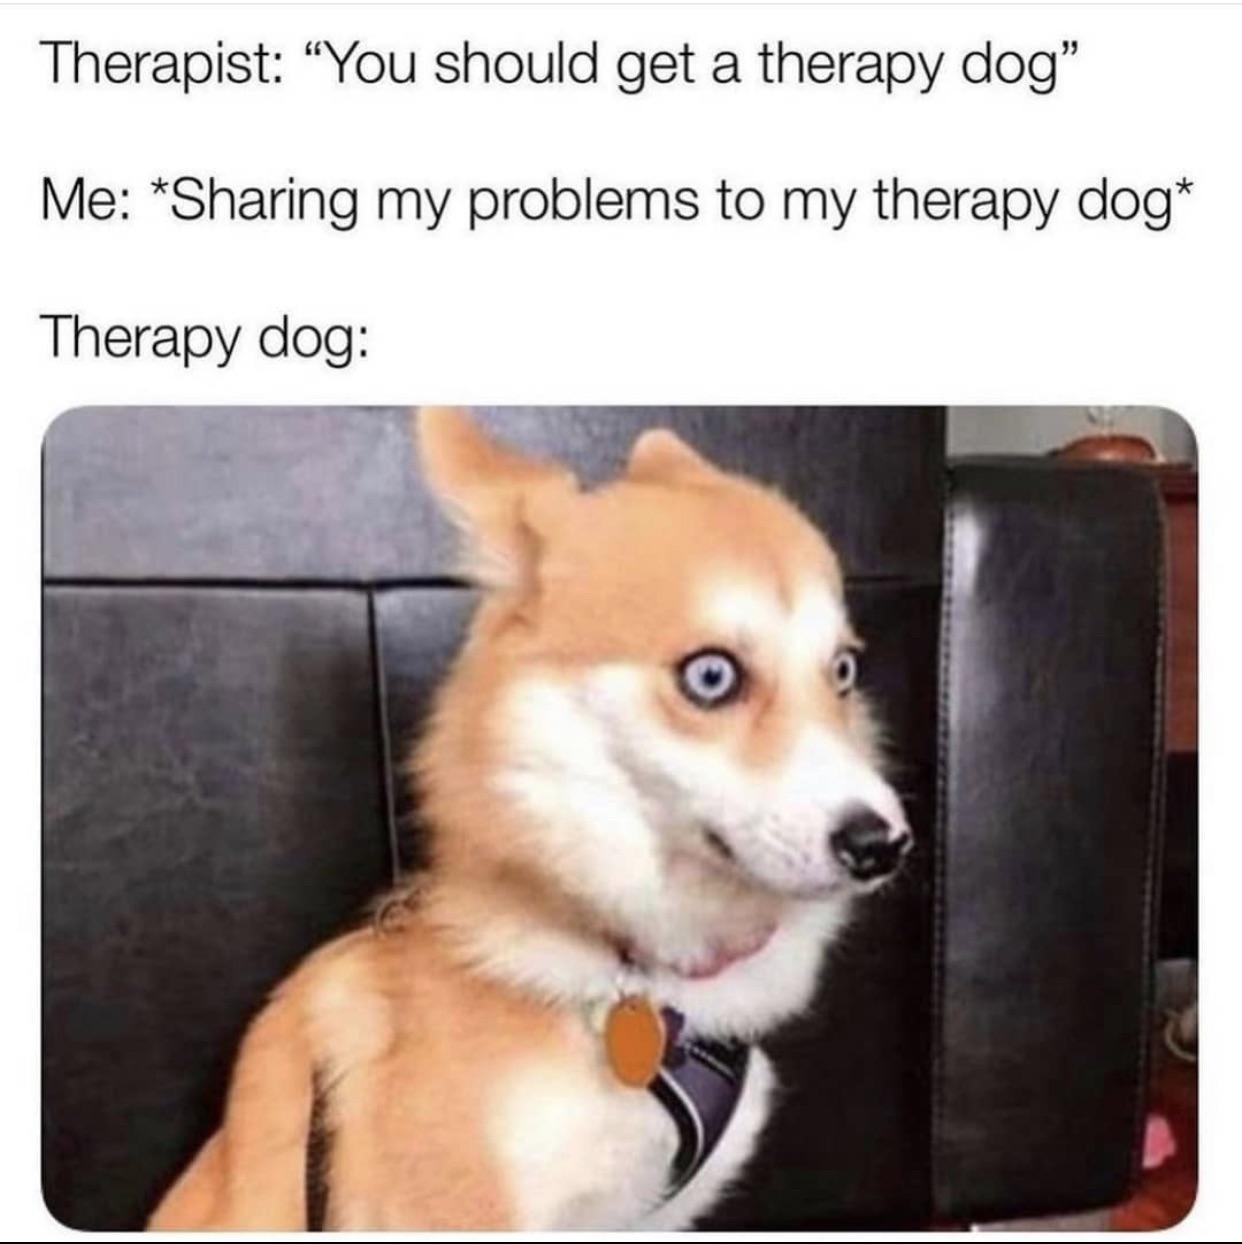 therapy dog after i share my problems - Therapist You should get a therapy dog" Me Sharing my problems to my therapy dog Therapy dog